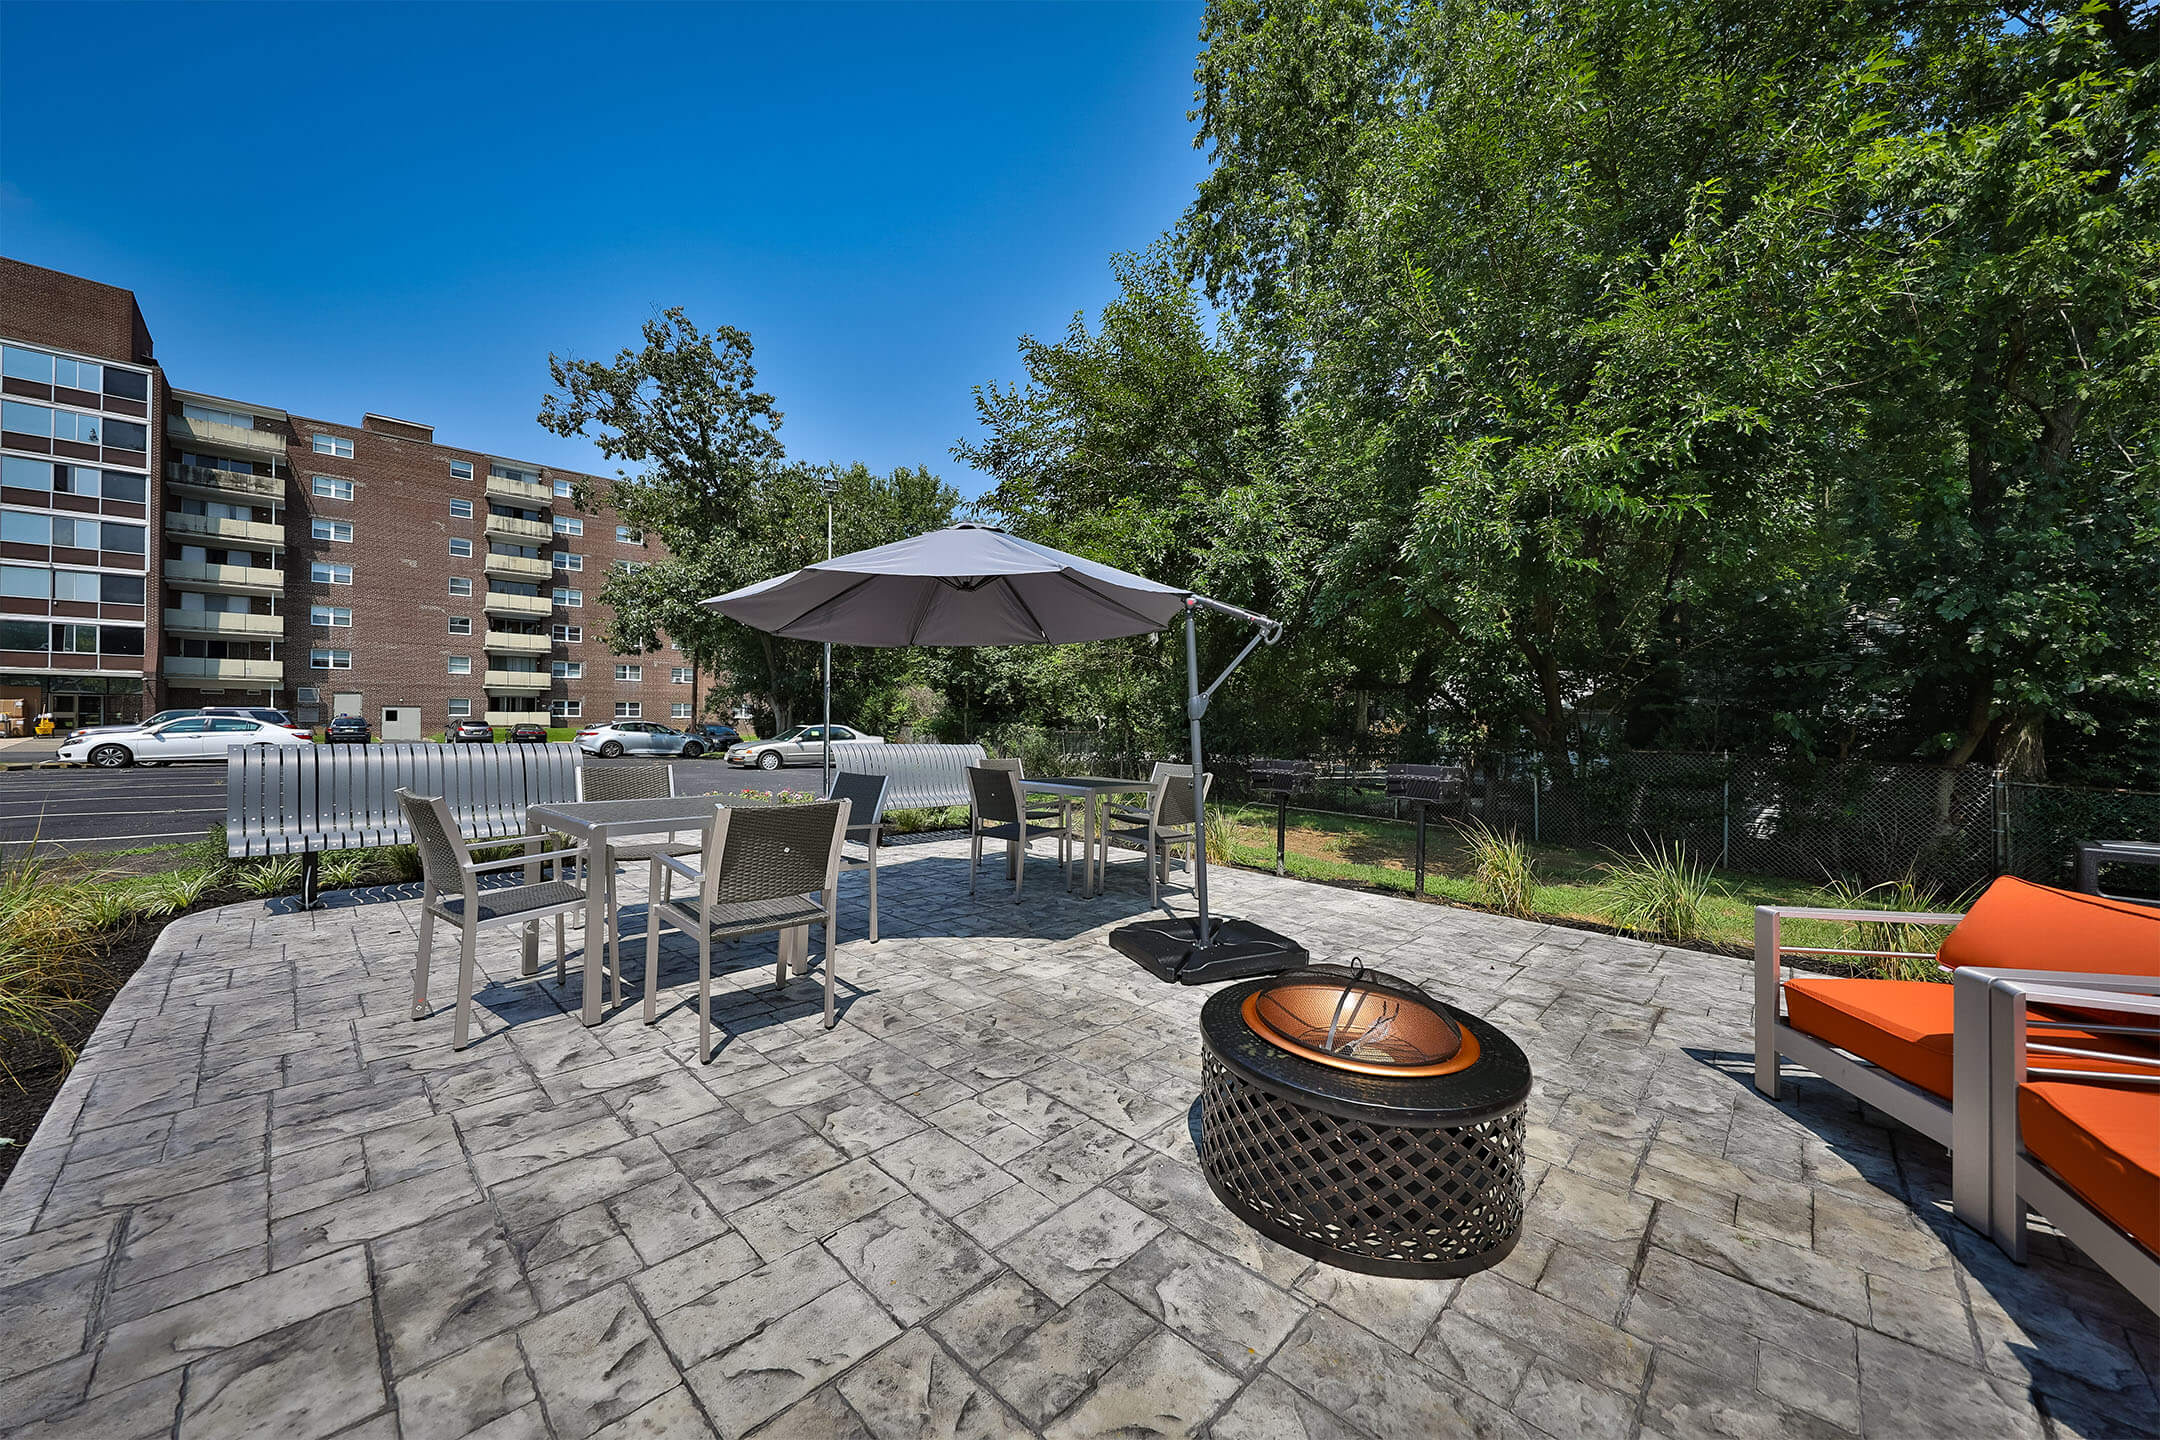 Outdoor seating with a firepit at Parc at Cherry Hill, Cherry Hill, New Jersey